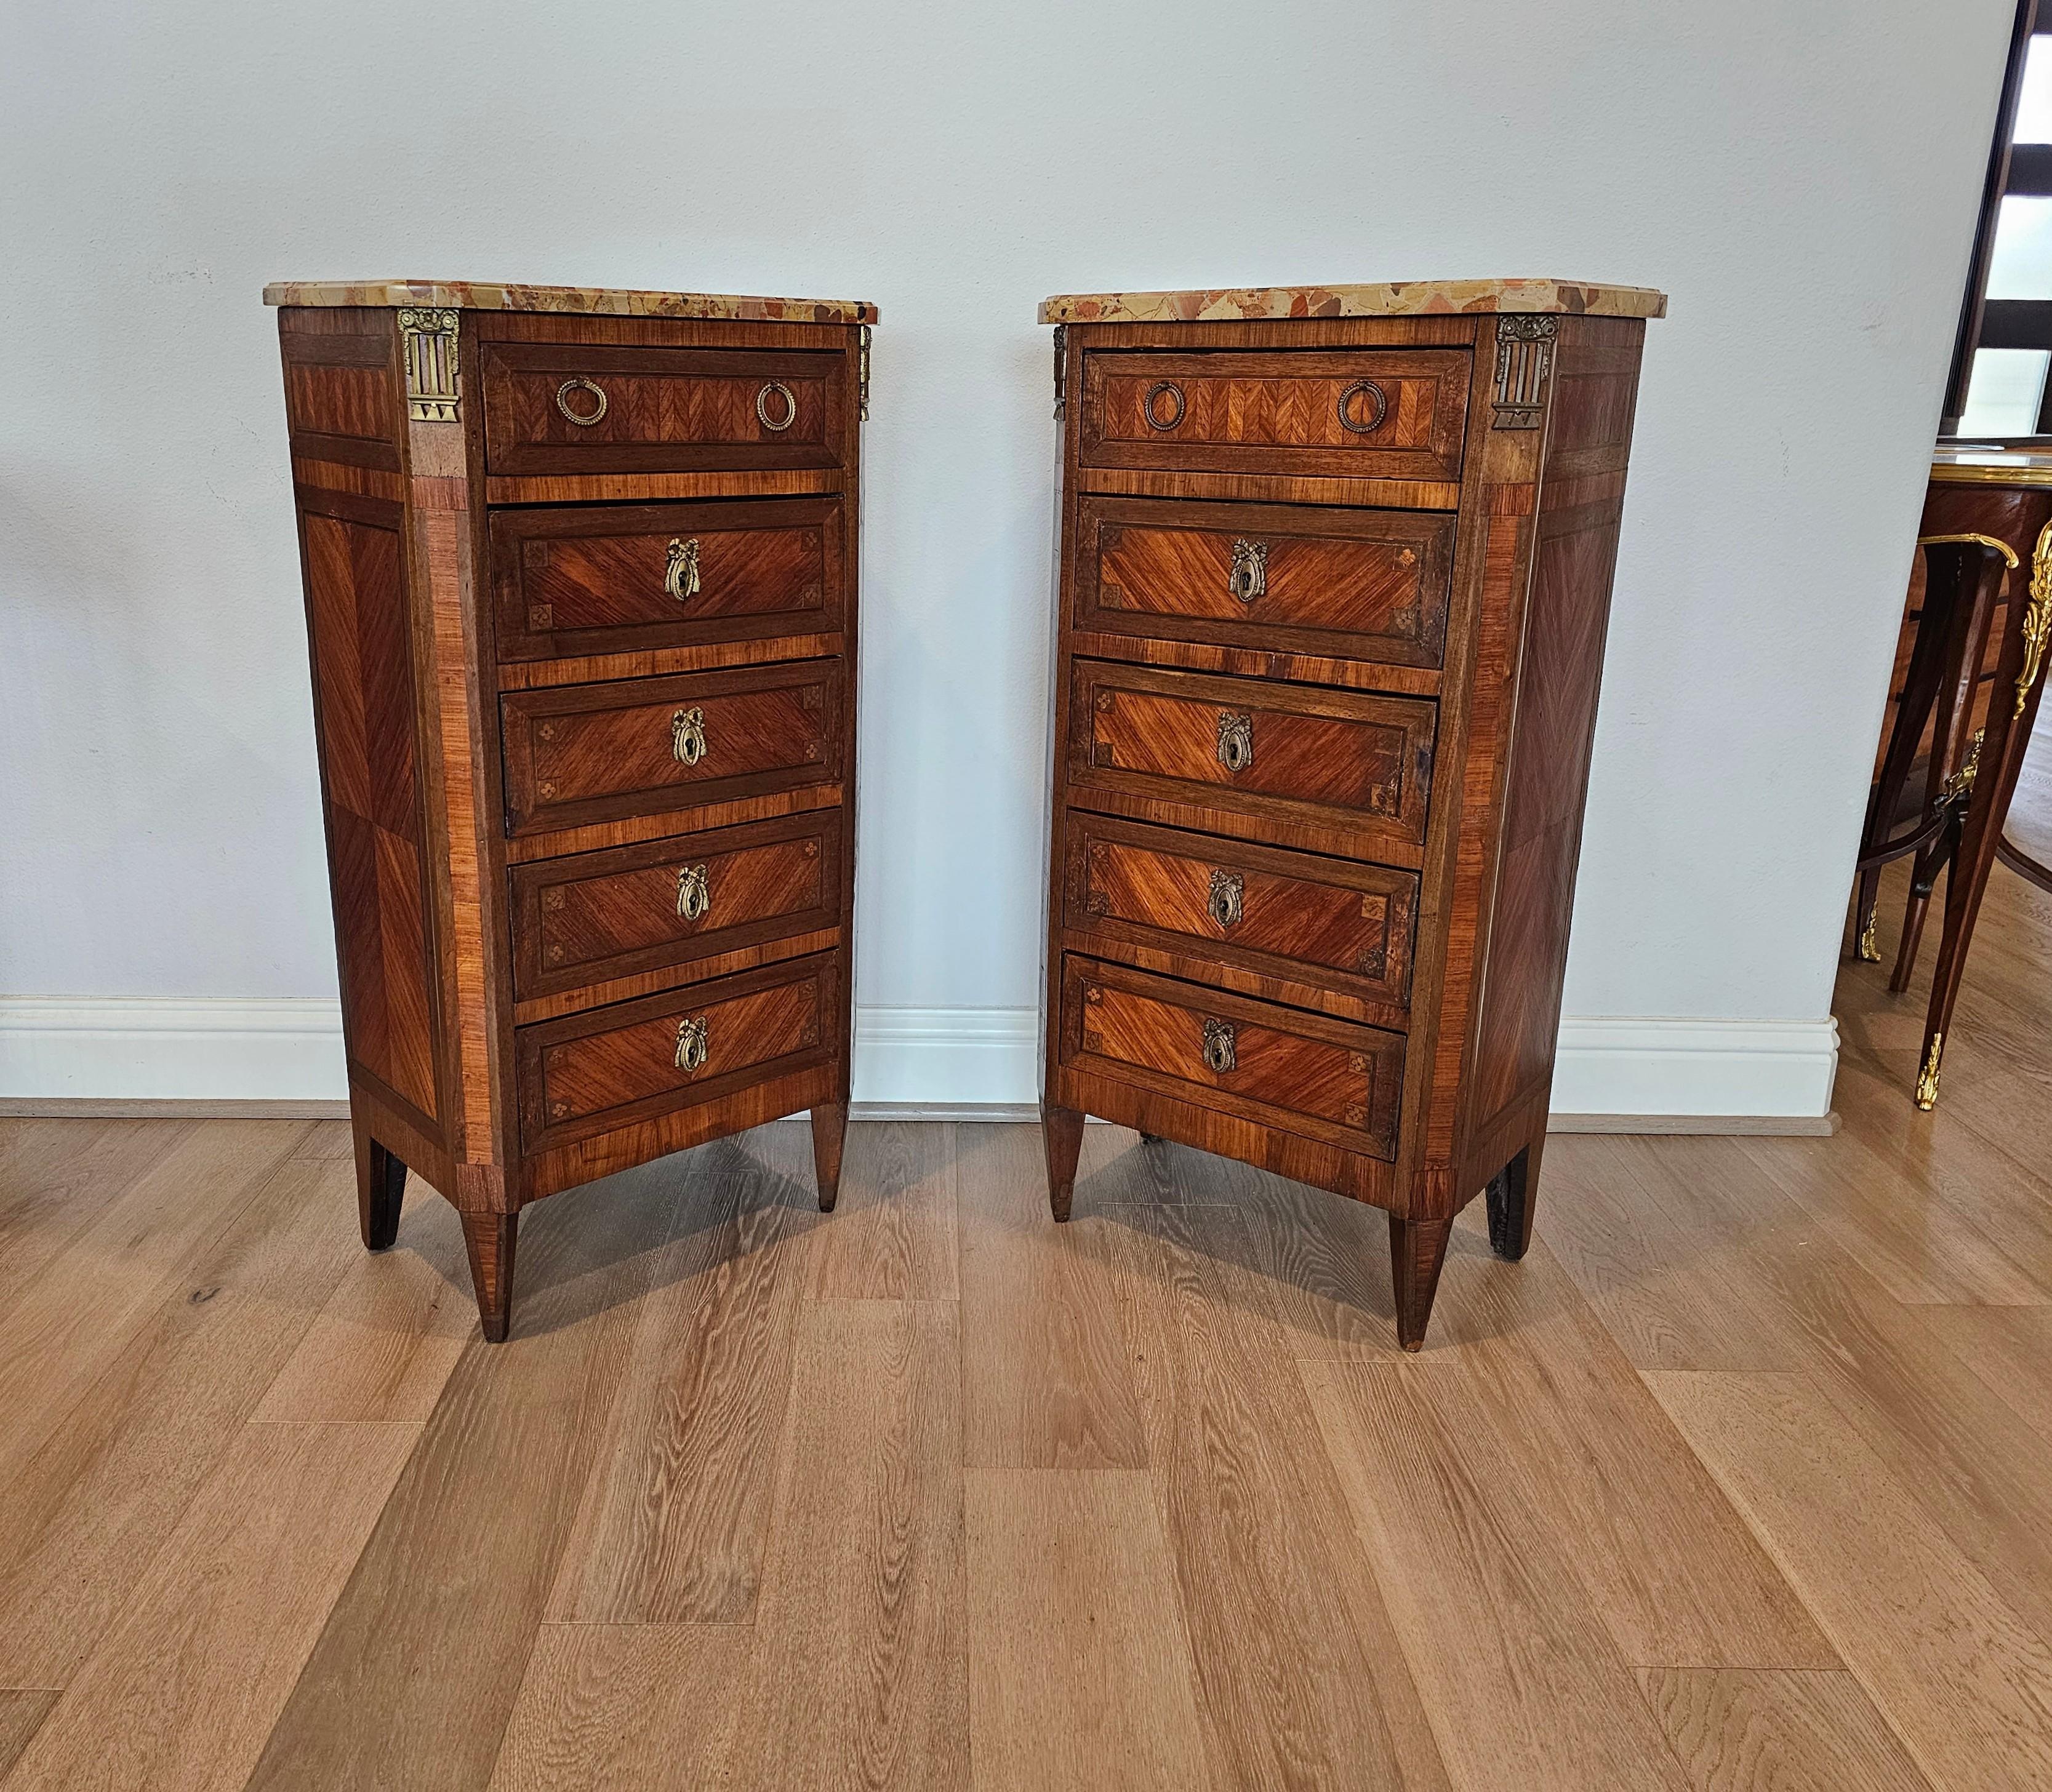 A charming and elegant pair of period Louis XVI (1774-1792) French chiffoniers. circa 1780

Exquisitely hand-crafted in France in the late 18th century, most likely Parisian work, high-quality solid wood construction finished in exotic kingwood,